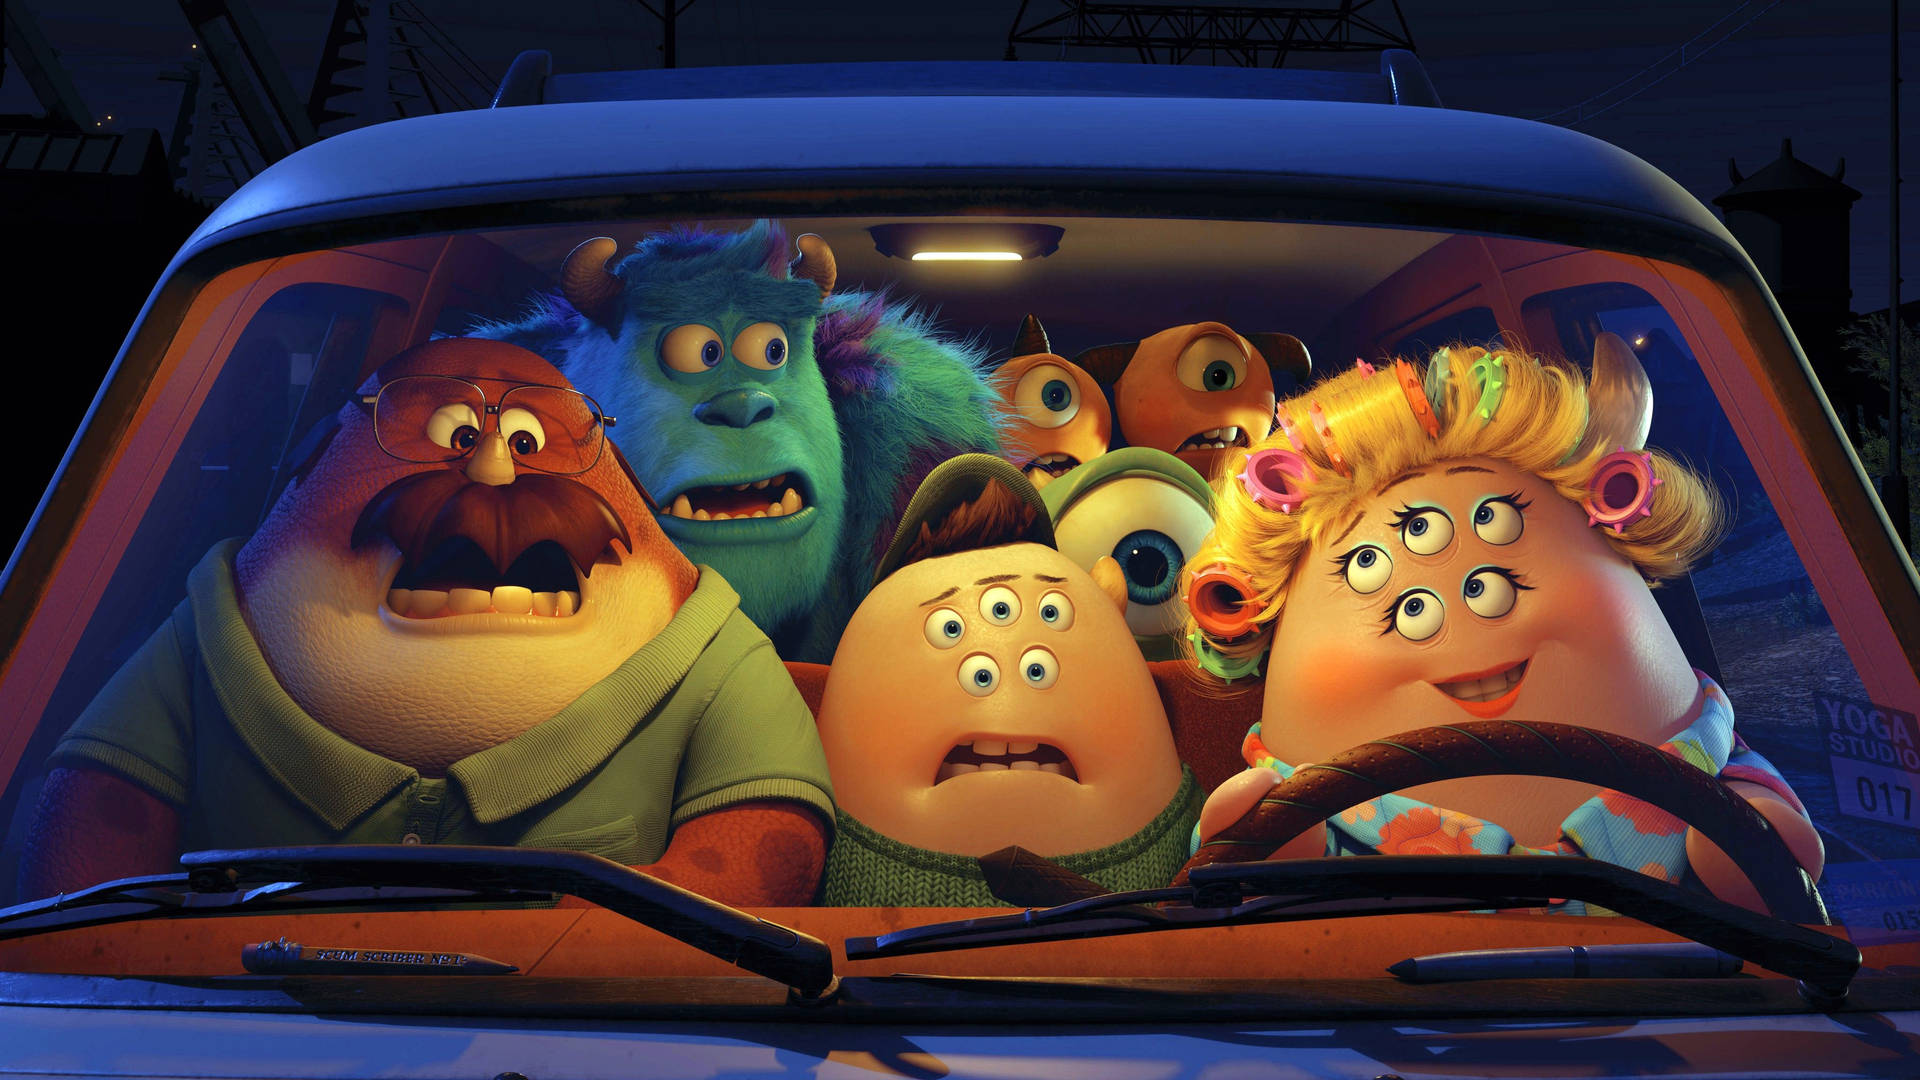 Sulley With Monsters In Car